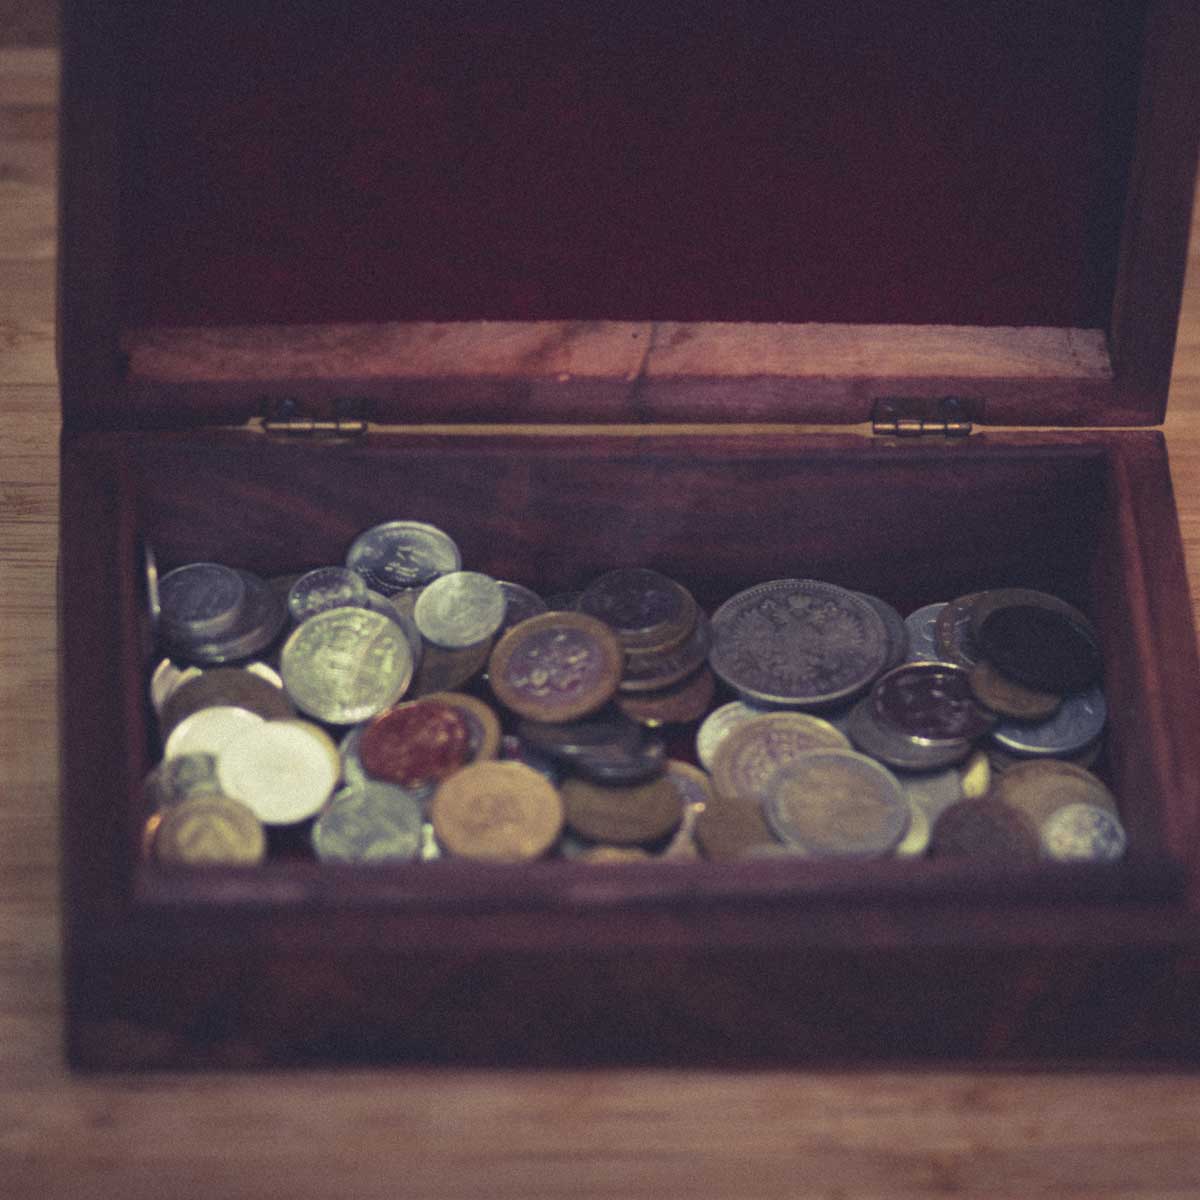 Vintage wooden vintage retro jewelry box with metal coins from different countries